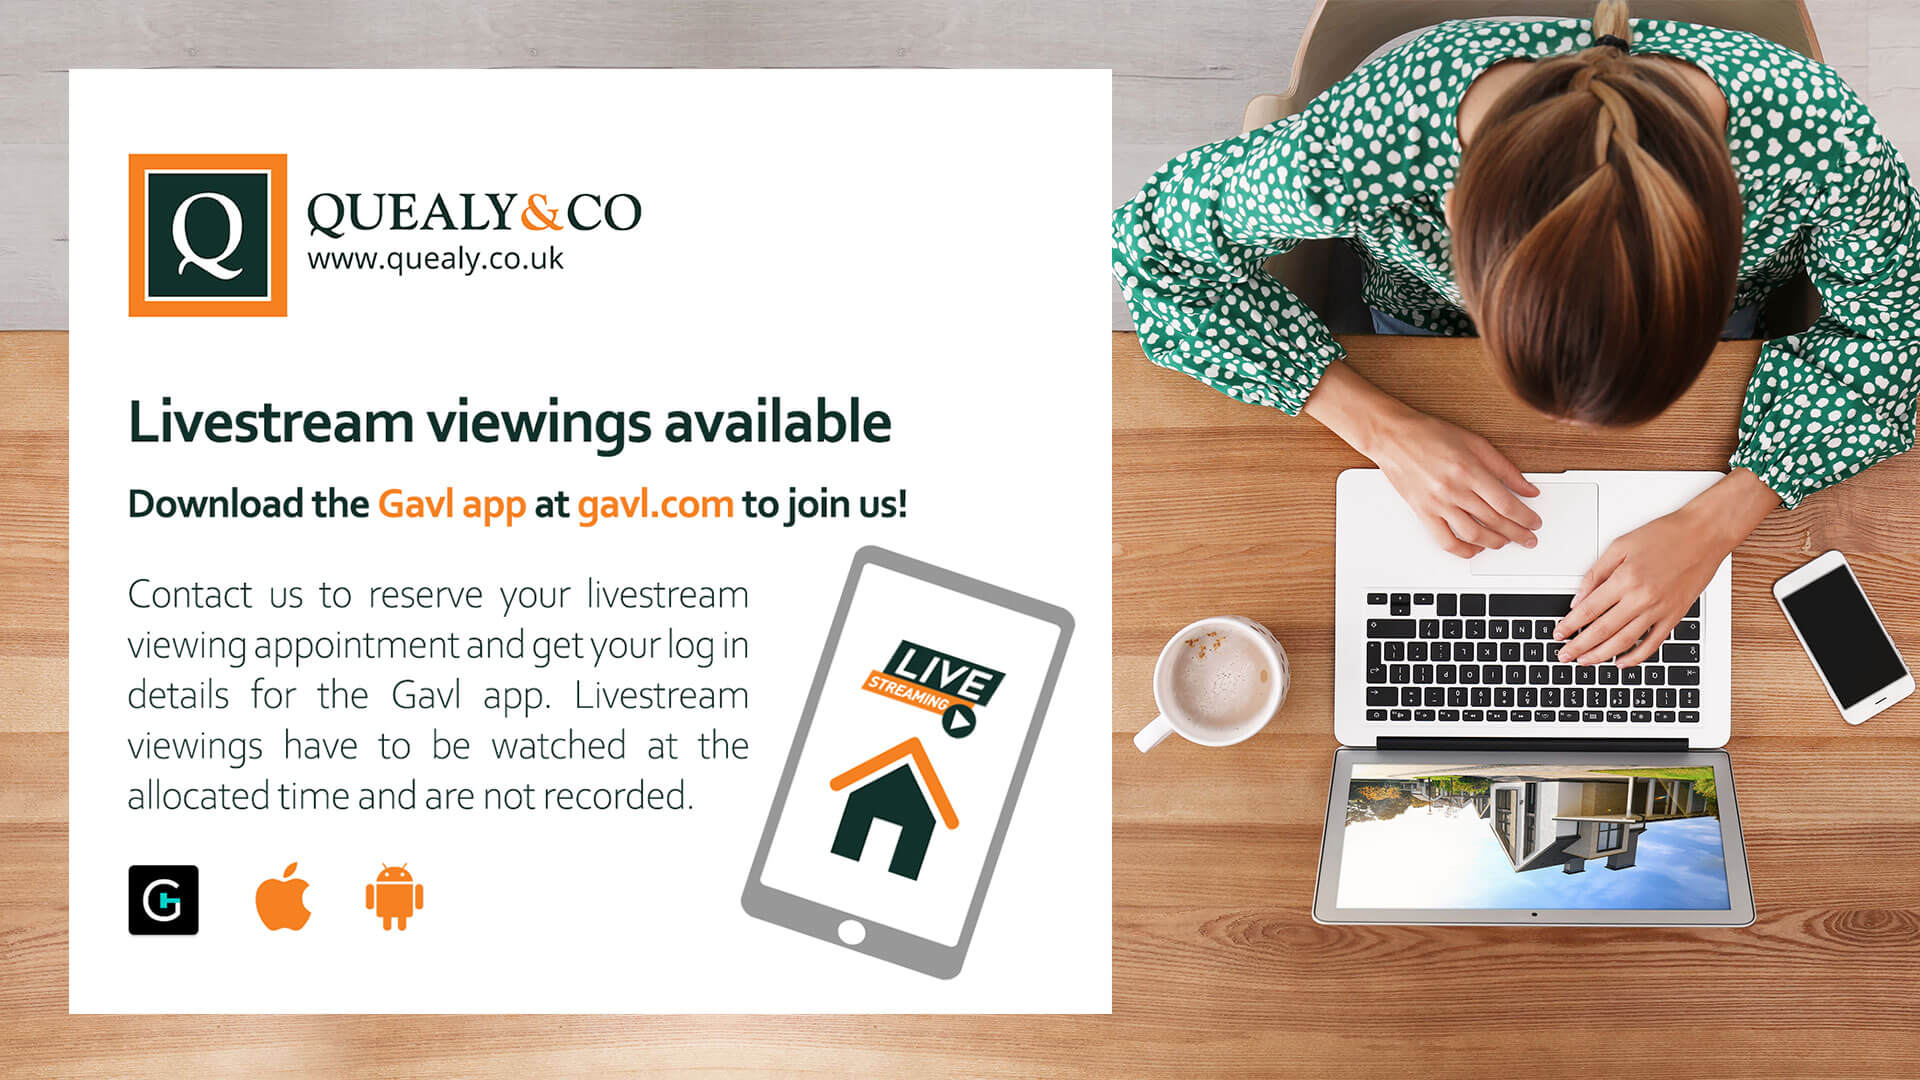 gavl livestream property viewings introduction with woman on laptop at quealy estate agents